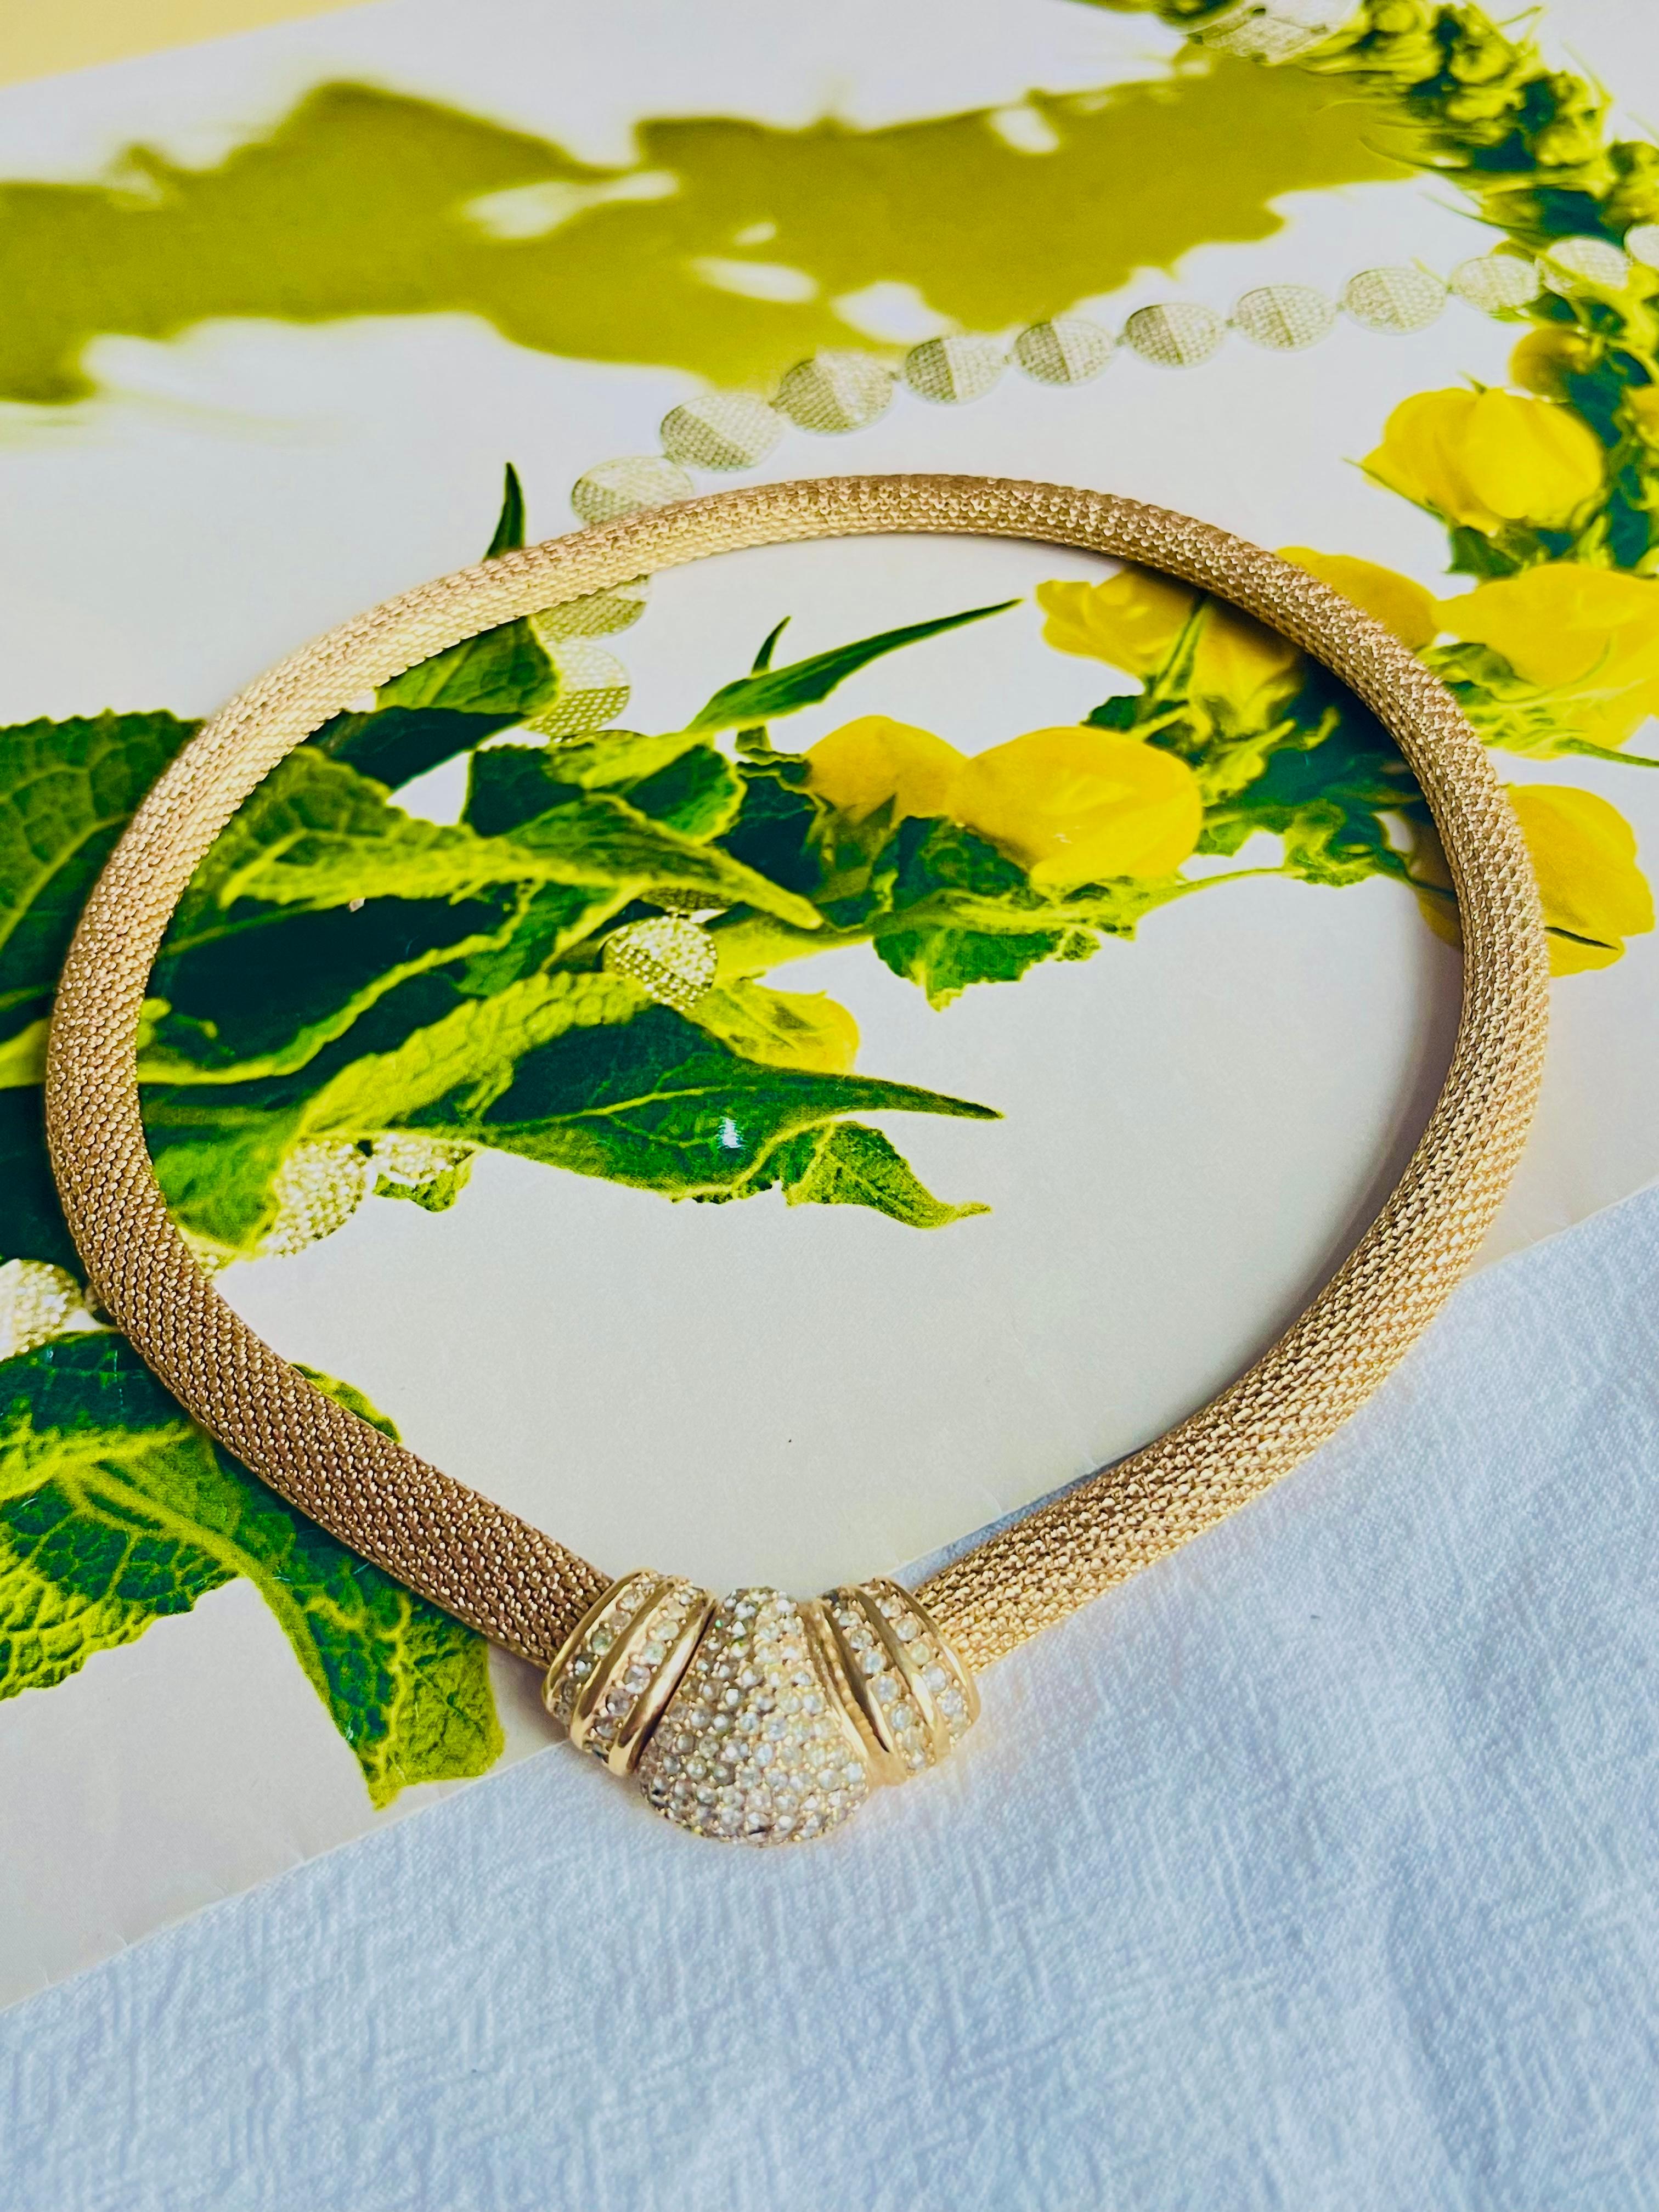 Christian Dior Vintage 1980s Button Whole Crystals Omega Snake Mesh Necklace, Gold Plated

Very good condition. Maybe some of colour loss and light scratches, barely noticeable. 

Marked 'Chr.Dior (C) '. 100% genuine.

It is over 40 years old. This